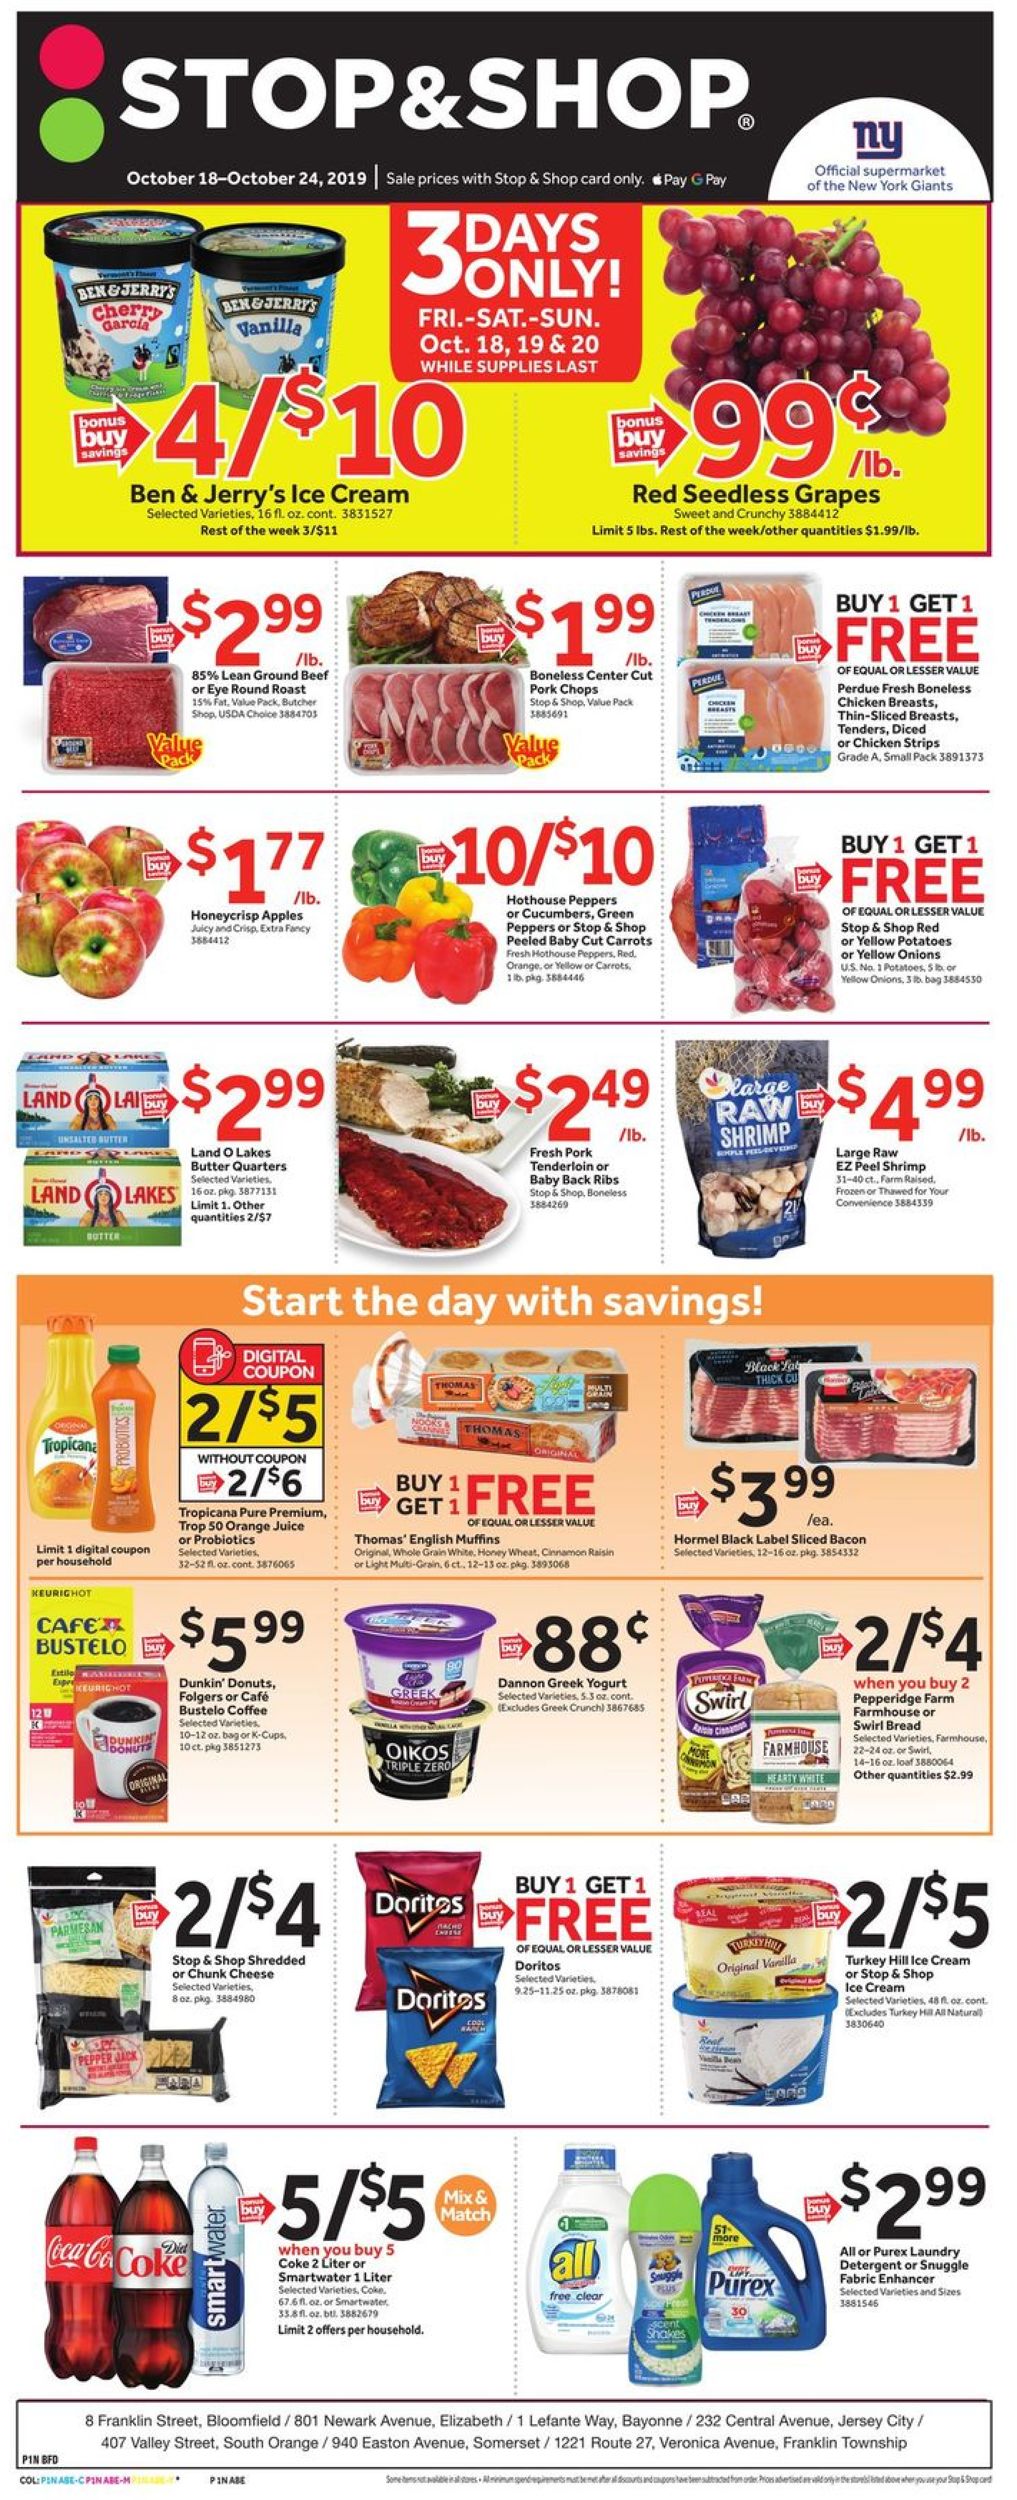 Stop and Shop Current weekly ad 10/18 - 10/24/2019 - frequent-ads.com